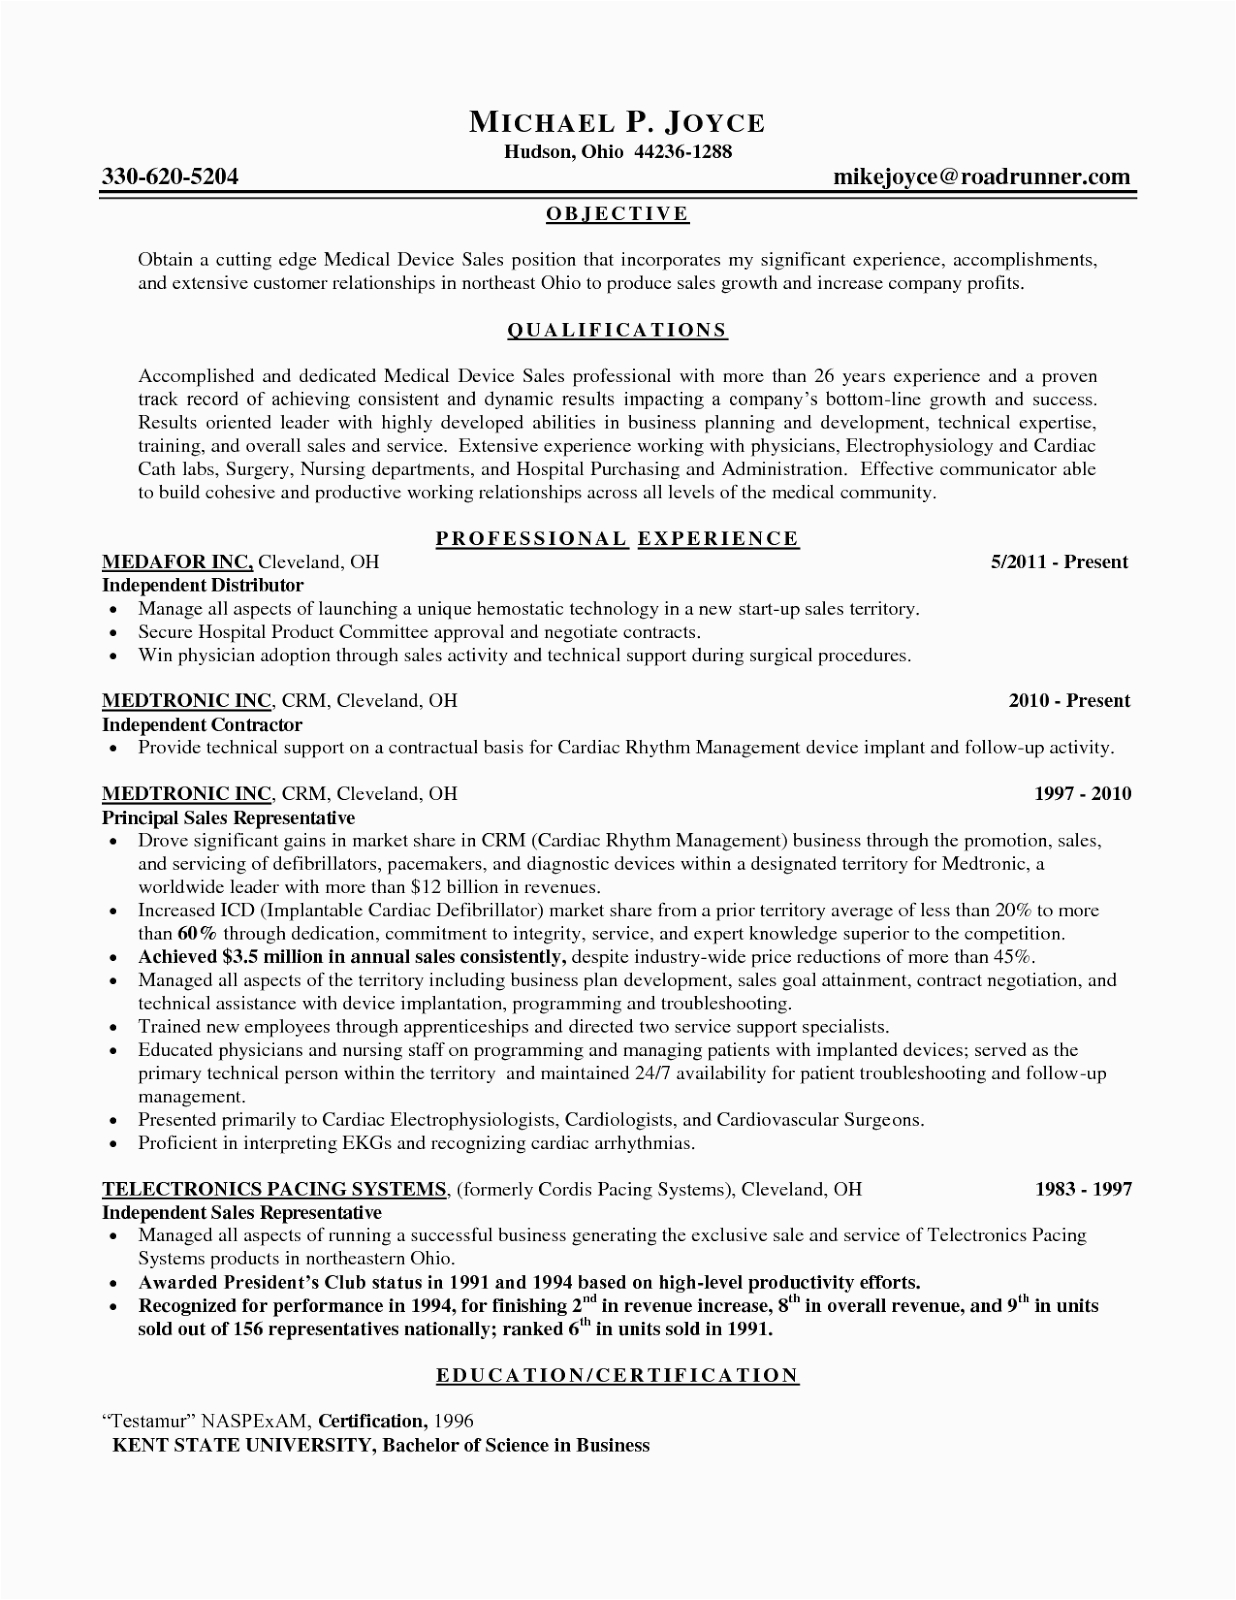 Sample Resume Objectives for Sales Representative Sales Representative Resume Keywords